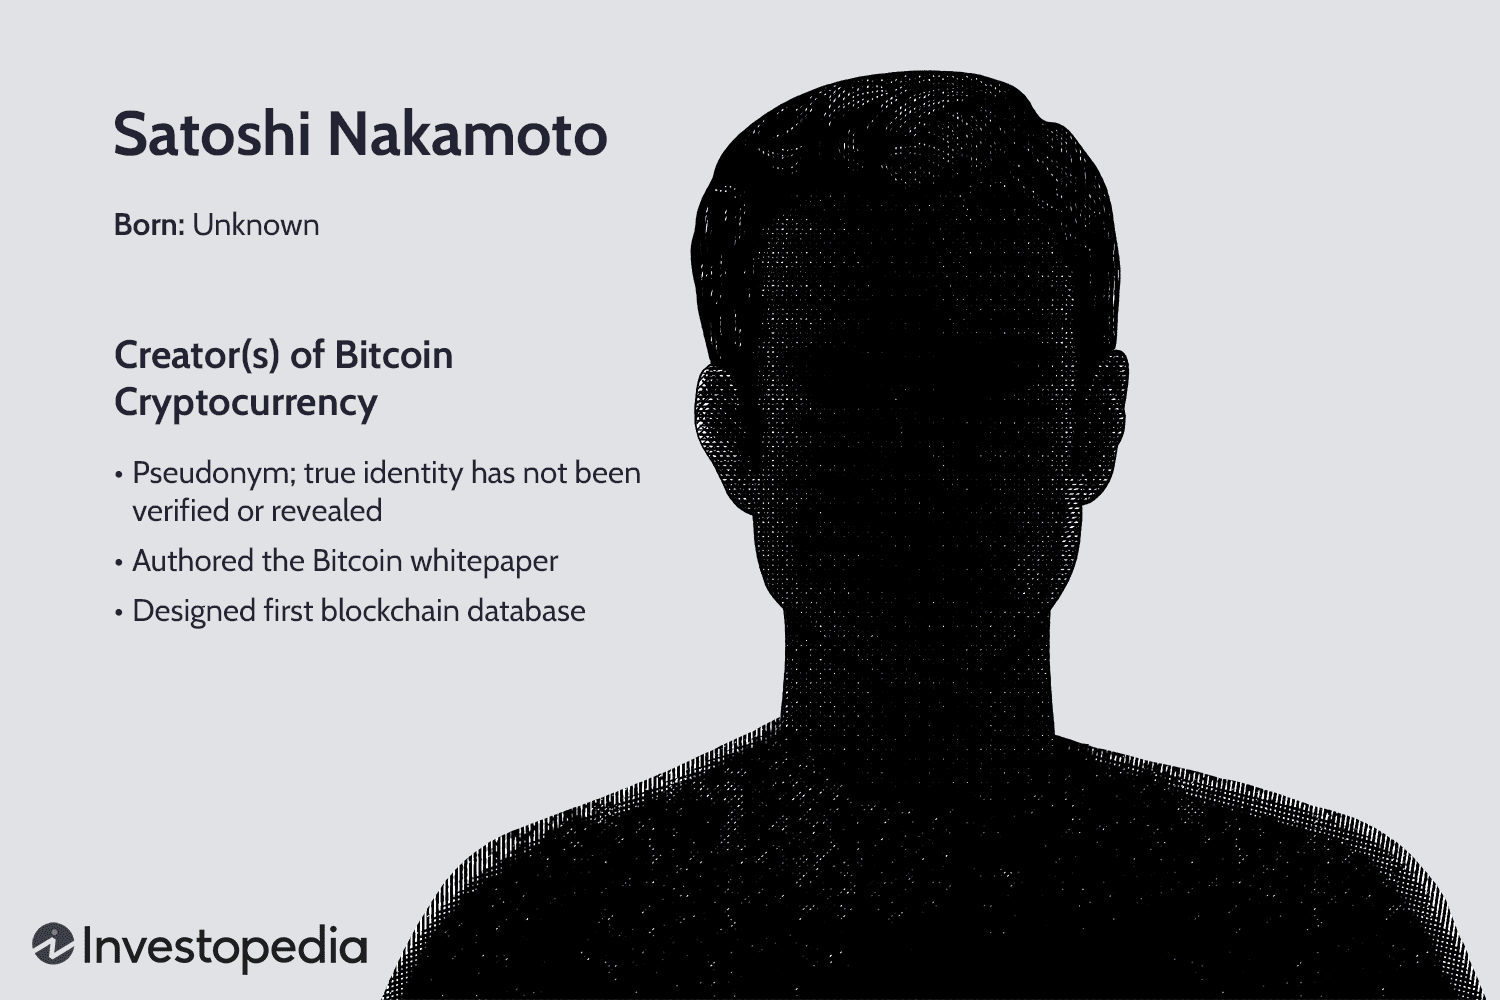 Crypto facts - The founder of Bitcoin is someone called Satoshi Nakamoto. Nobody knows who he is, what his real name is, or where he lives.-u/-INFOWARS-